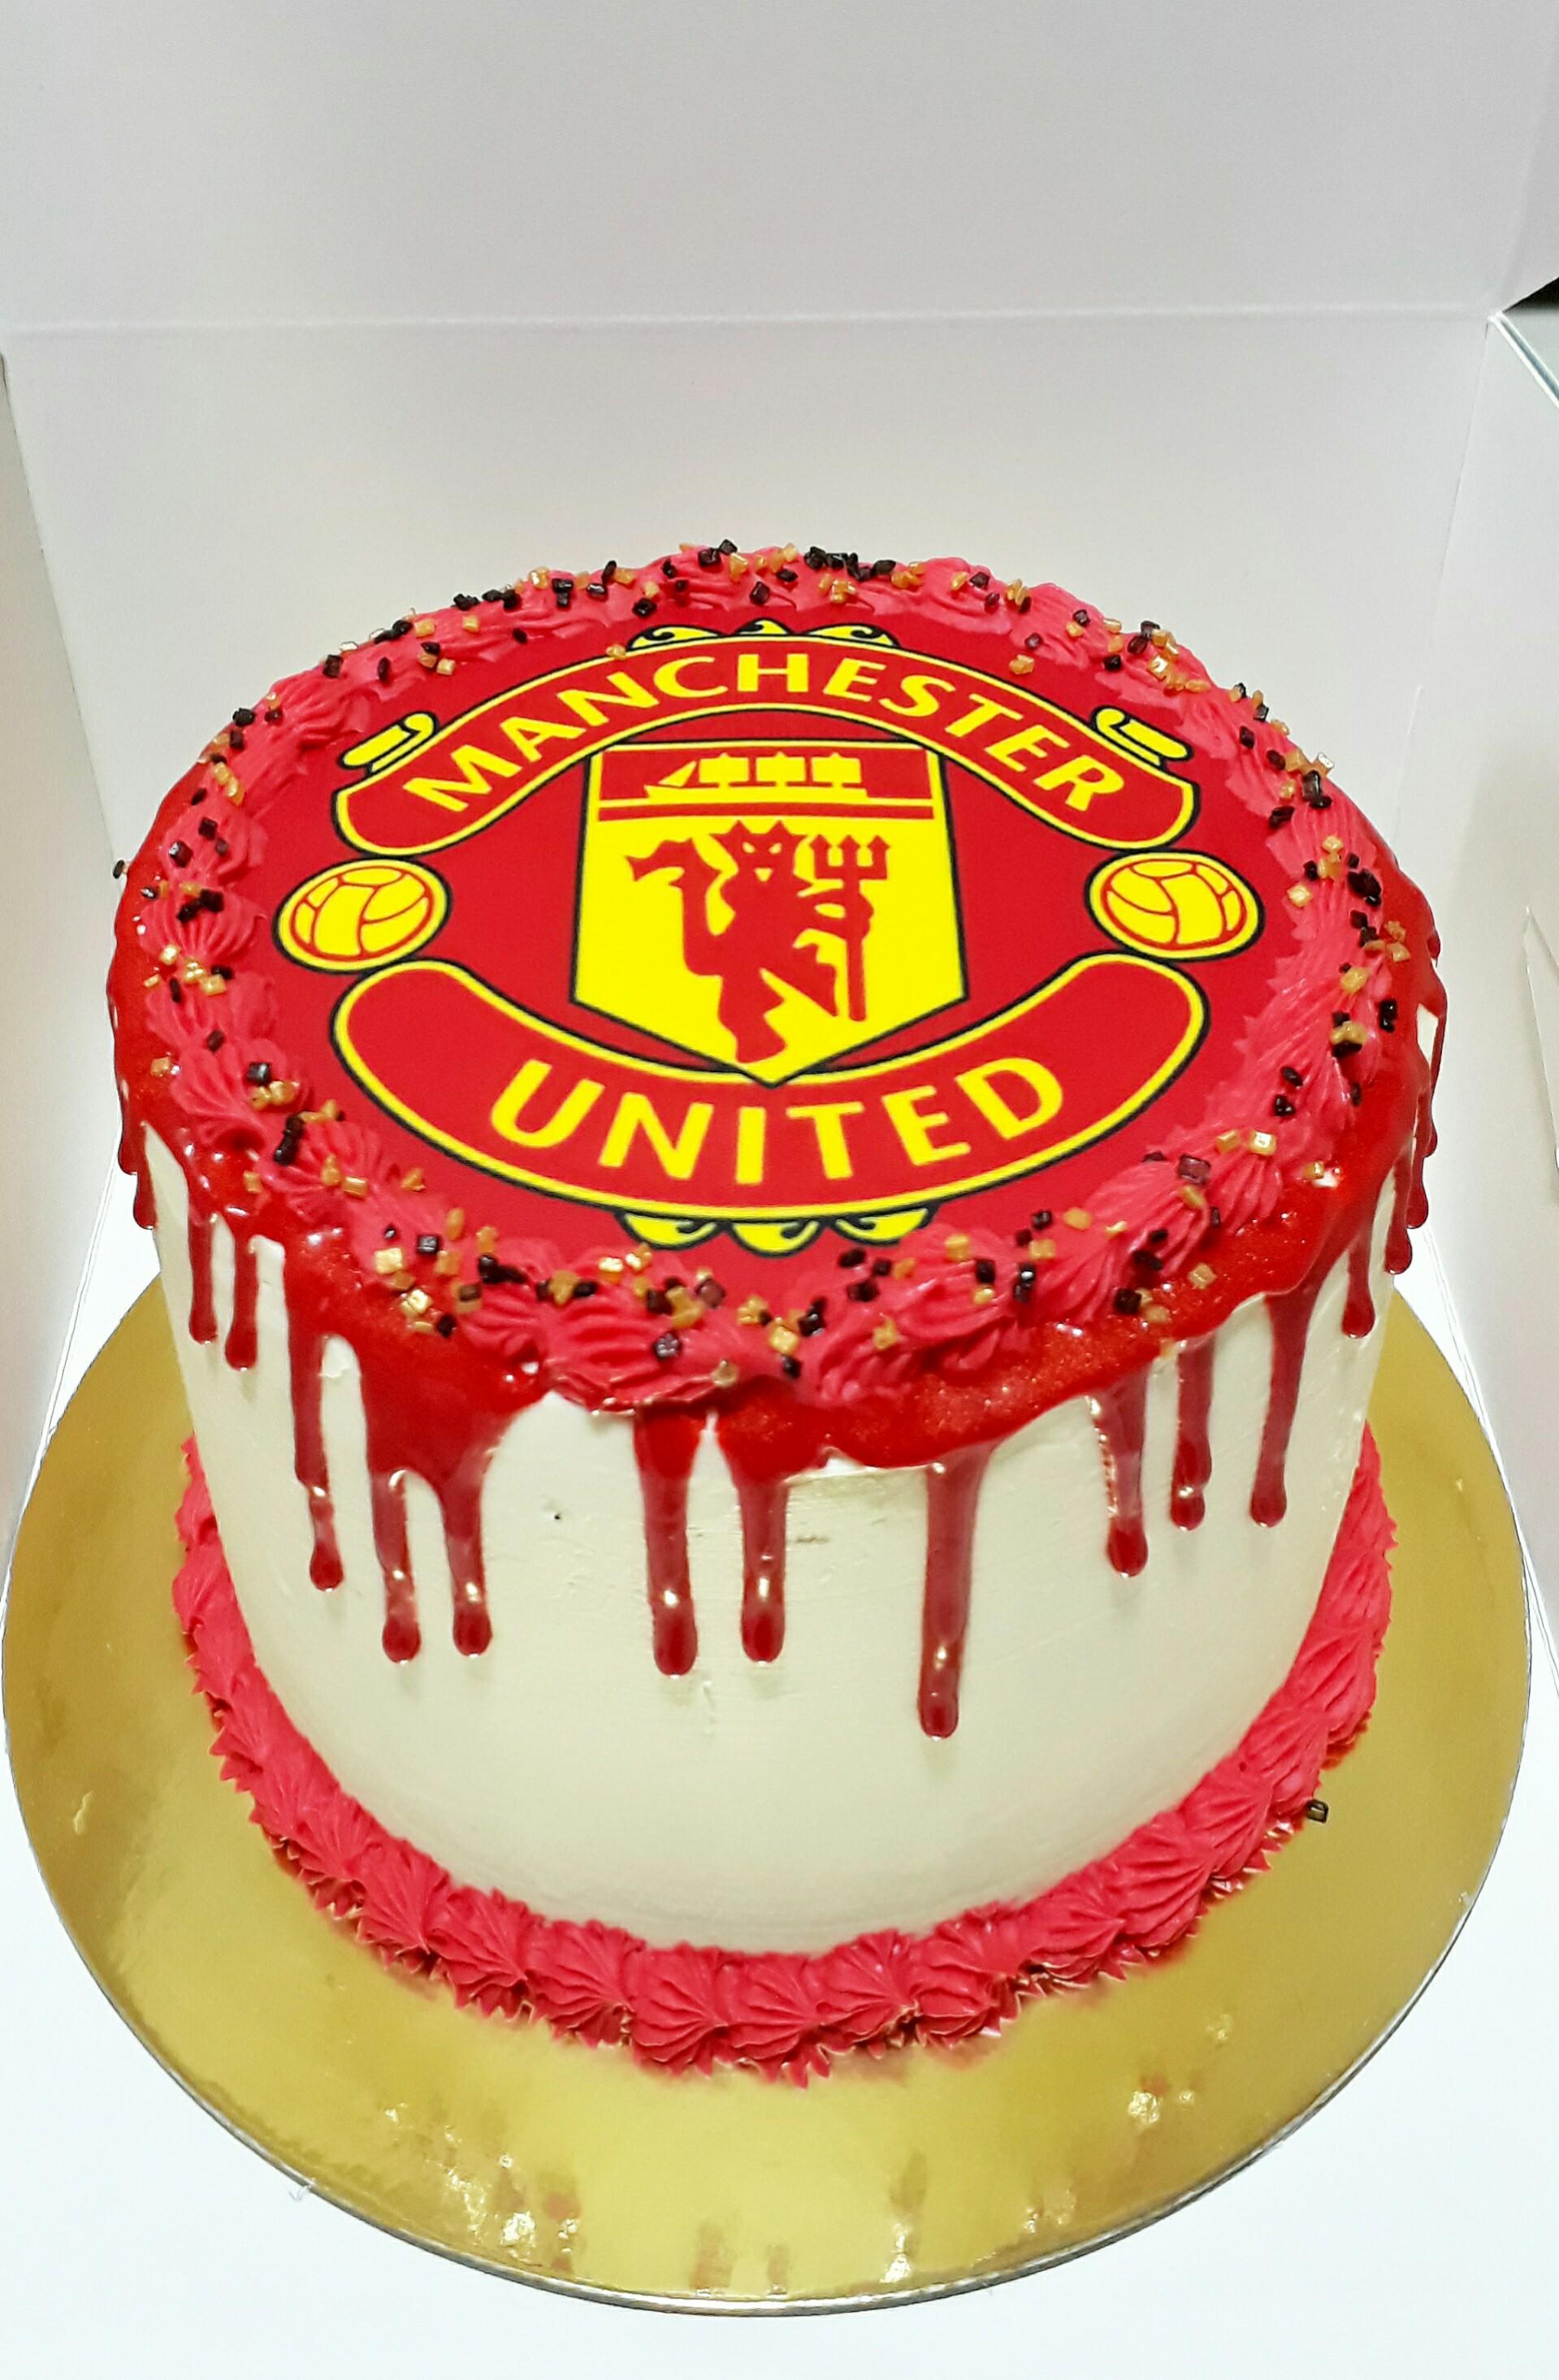 Baked by chloe - Manchester United T-shirt cake | Facebook